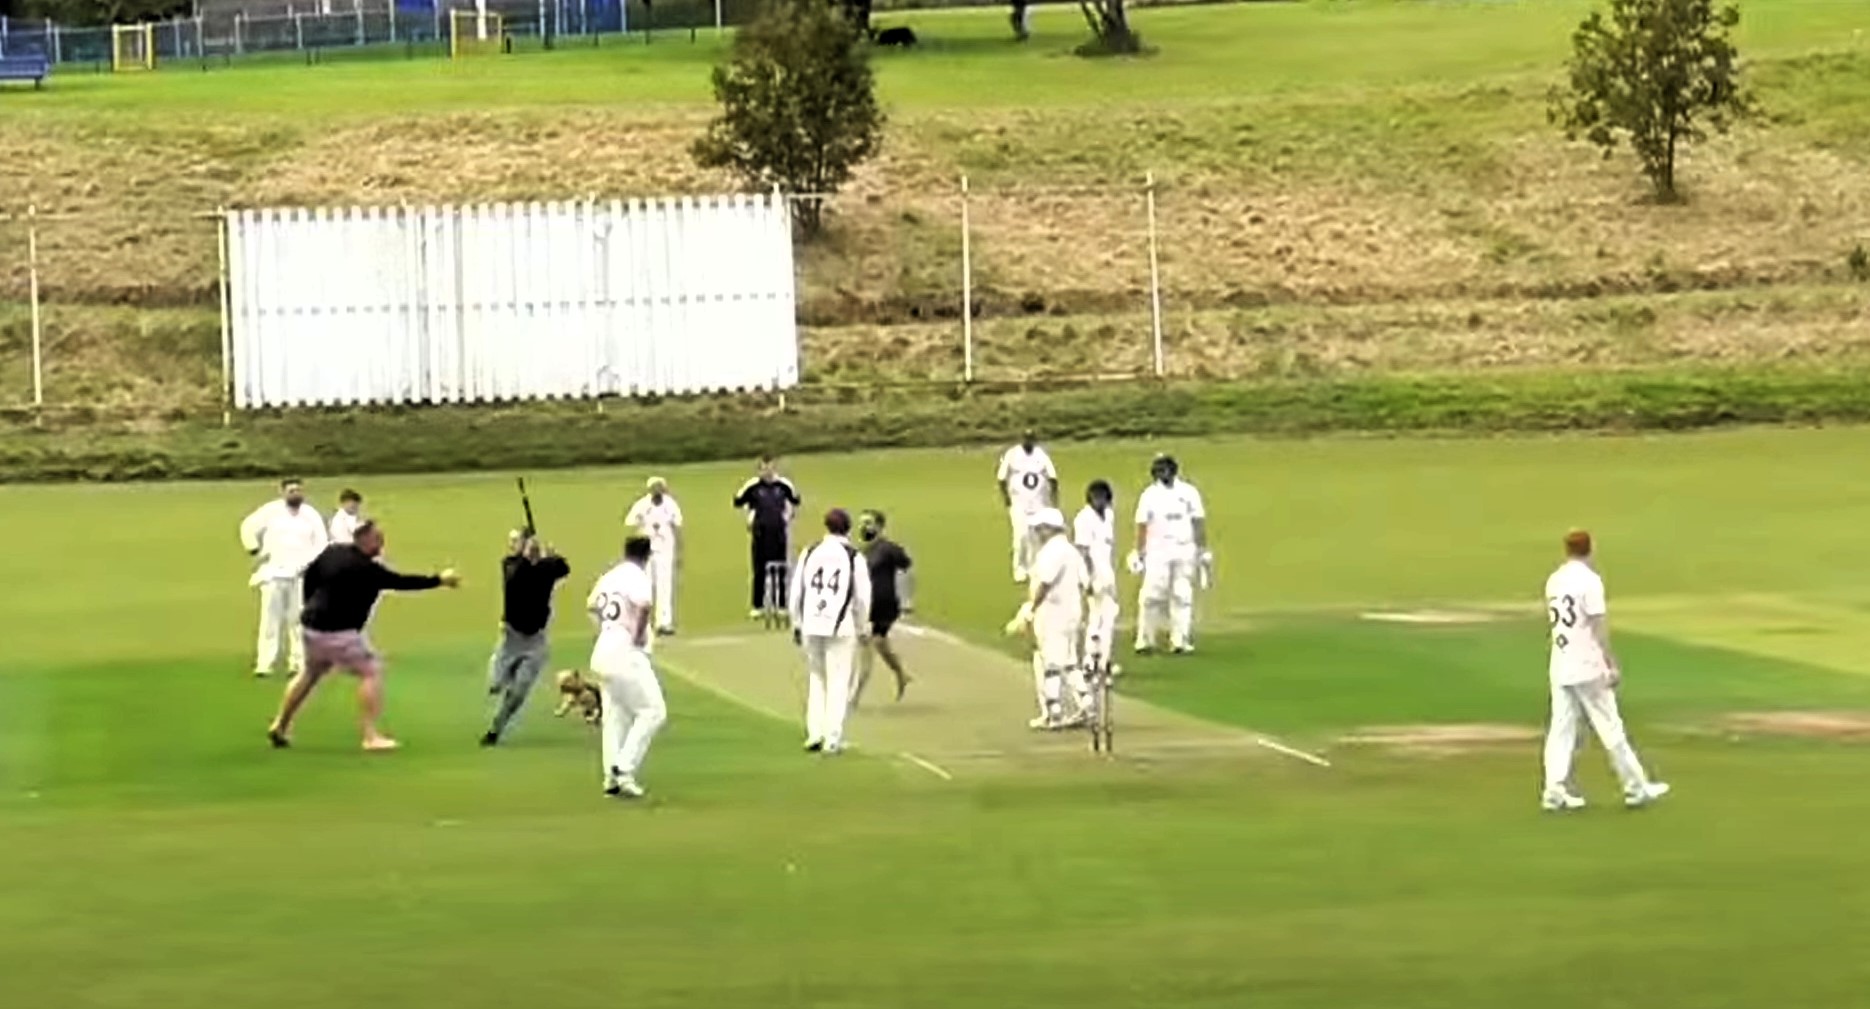 A cricket match in Deeside, North Wales, was interrupted by two brawling spectators. The shocking incident, now under police investigation, left players and fans stunned.